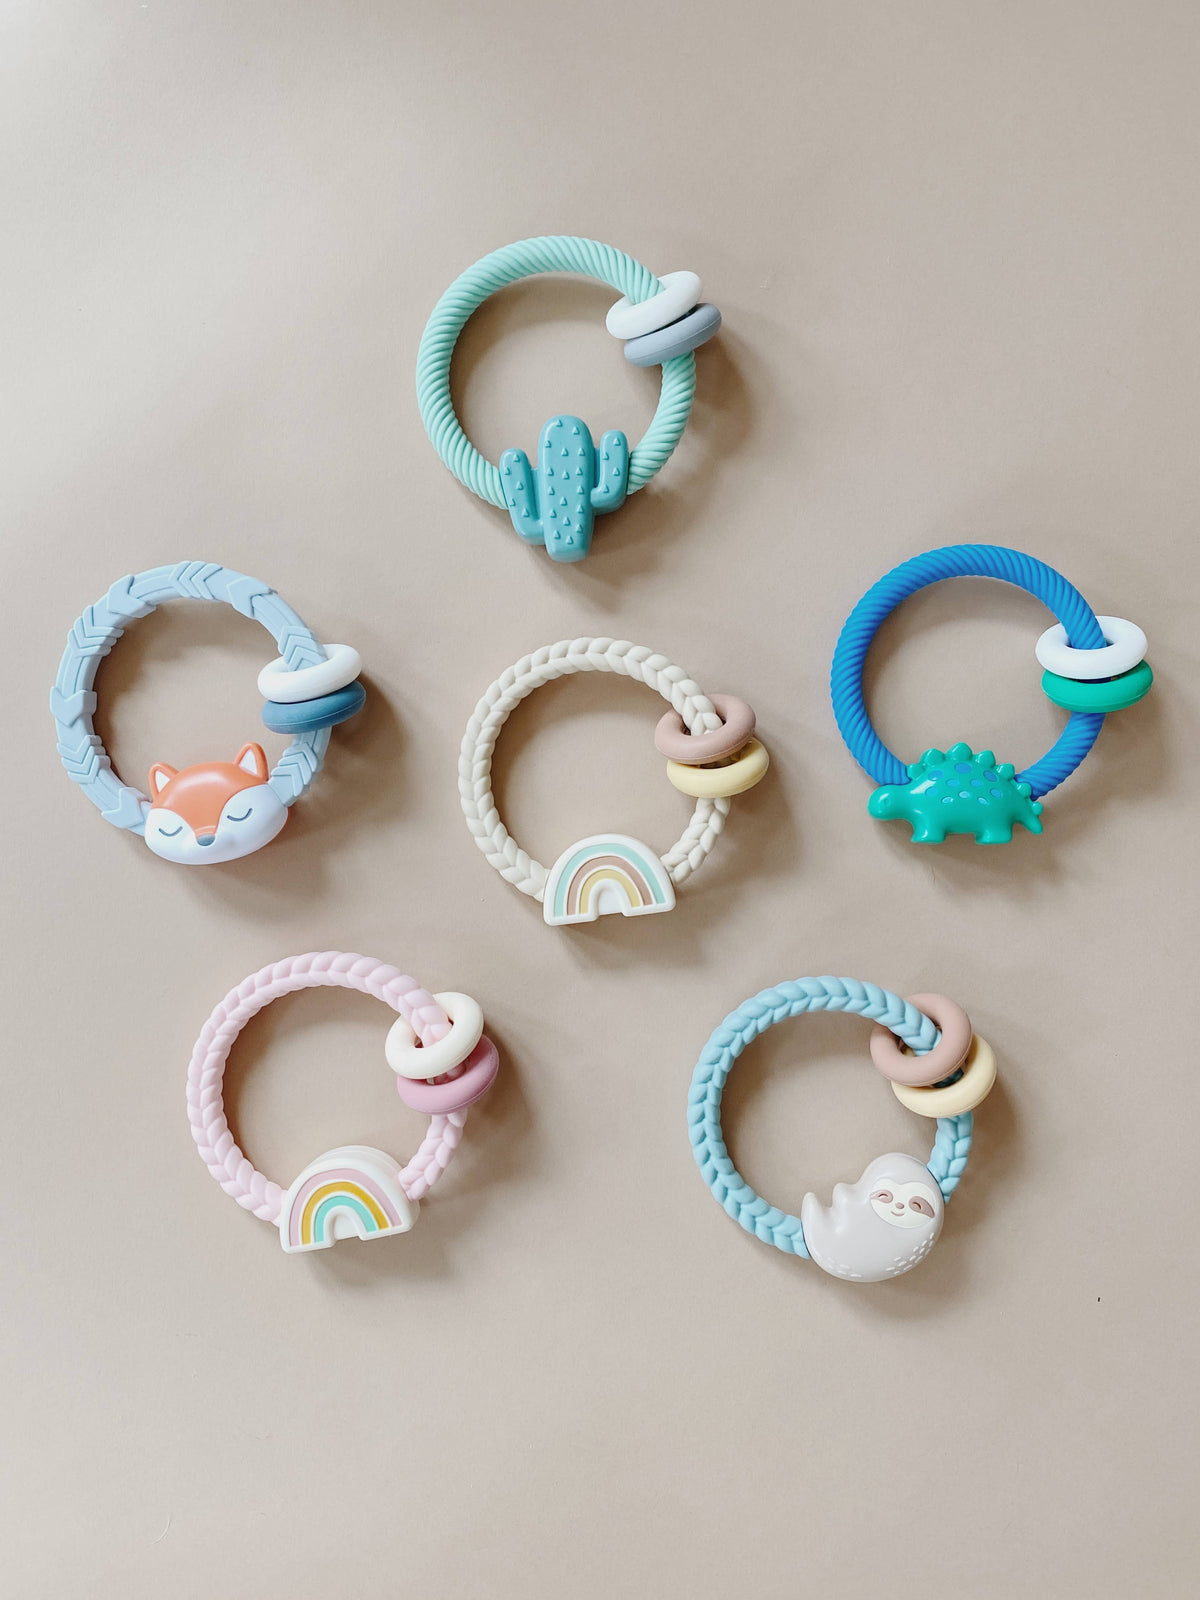 Itzy Ritzy Ritzy Rattle™ Silicone Teether Rattles: Cactus